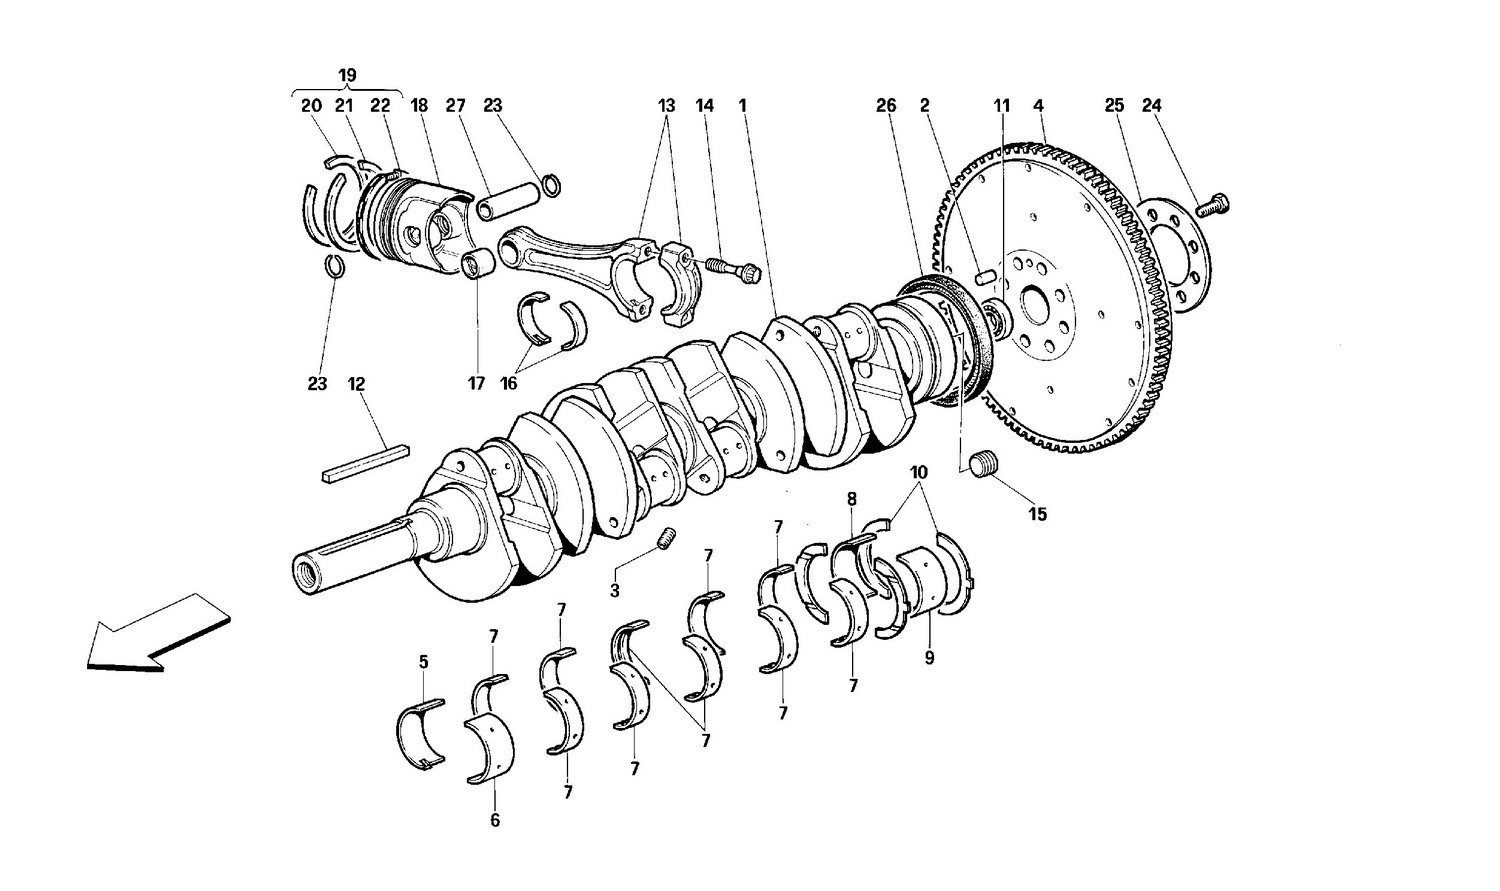 Crankshaft - Connecting rods and pistons